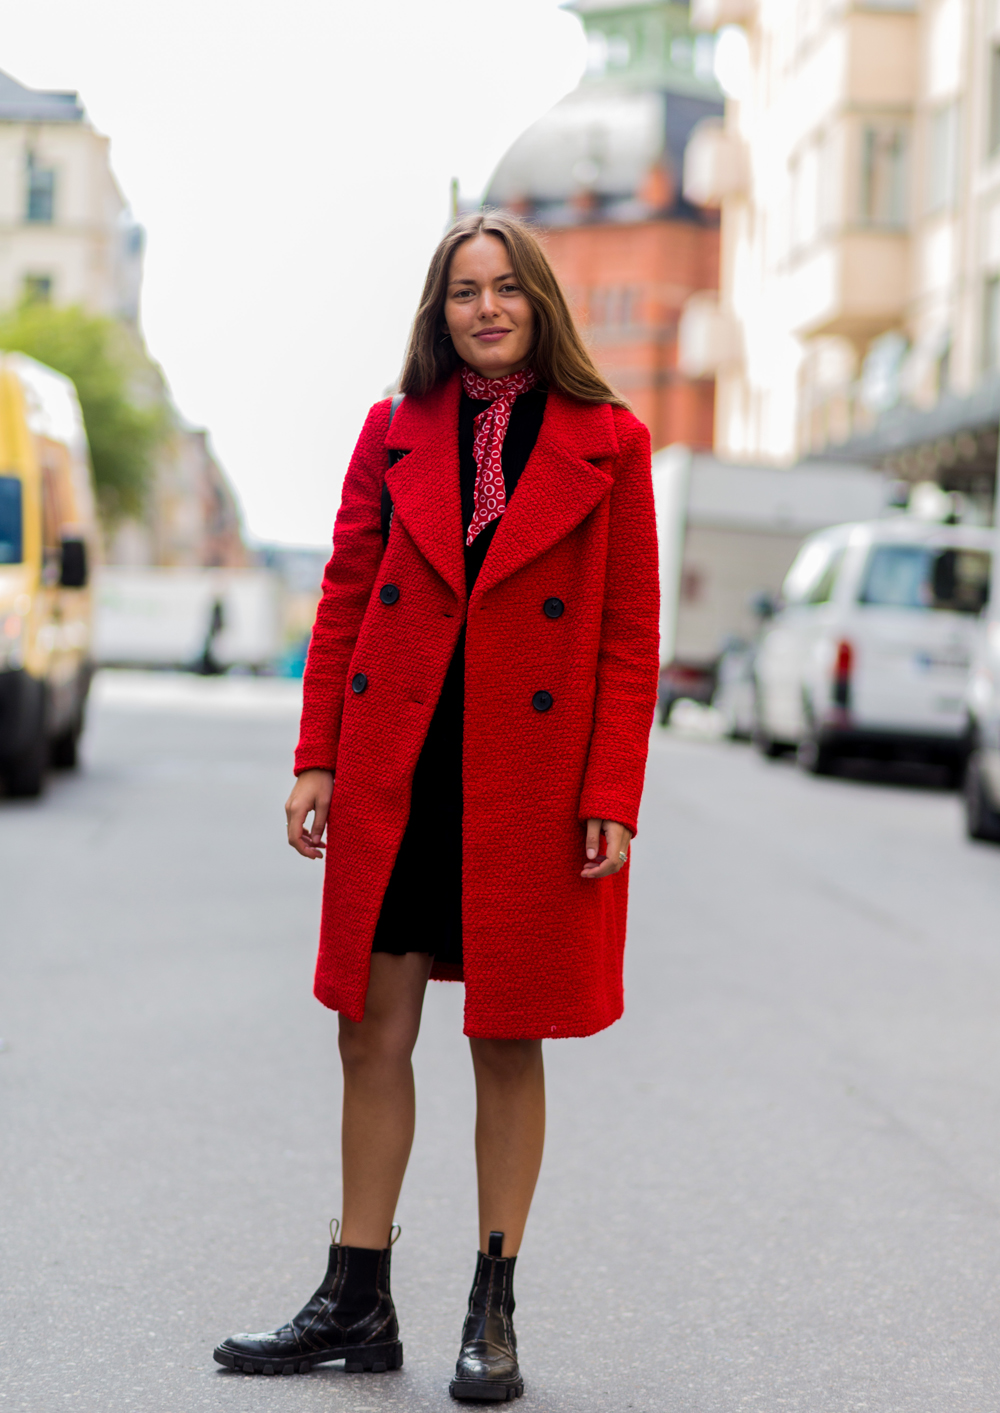 STOCKHOLM, SWEDEN - AUGUST 30: Victoria Saceanu wearing a red coat, black Chelsea boots, a red bandana scarf and black dress outside Lexington during the second day of the Stockholm Fashion Week Spring/Summer 2017 on August 30, 2016 in Stockholm, Sweden. (Photo by Christian Vierig/Getty Images)